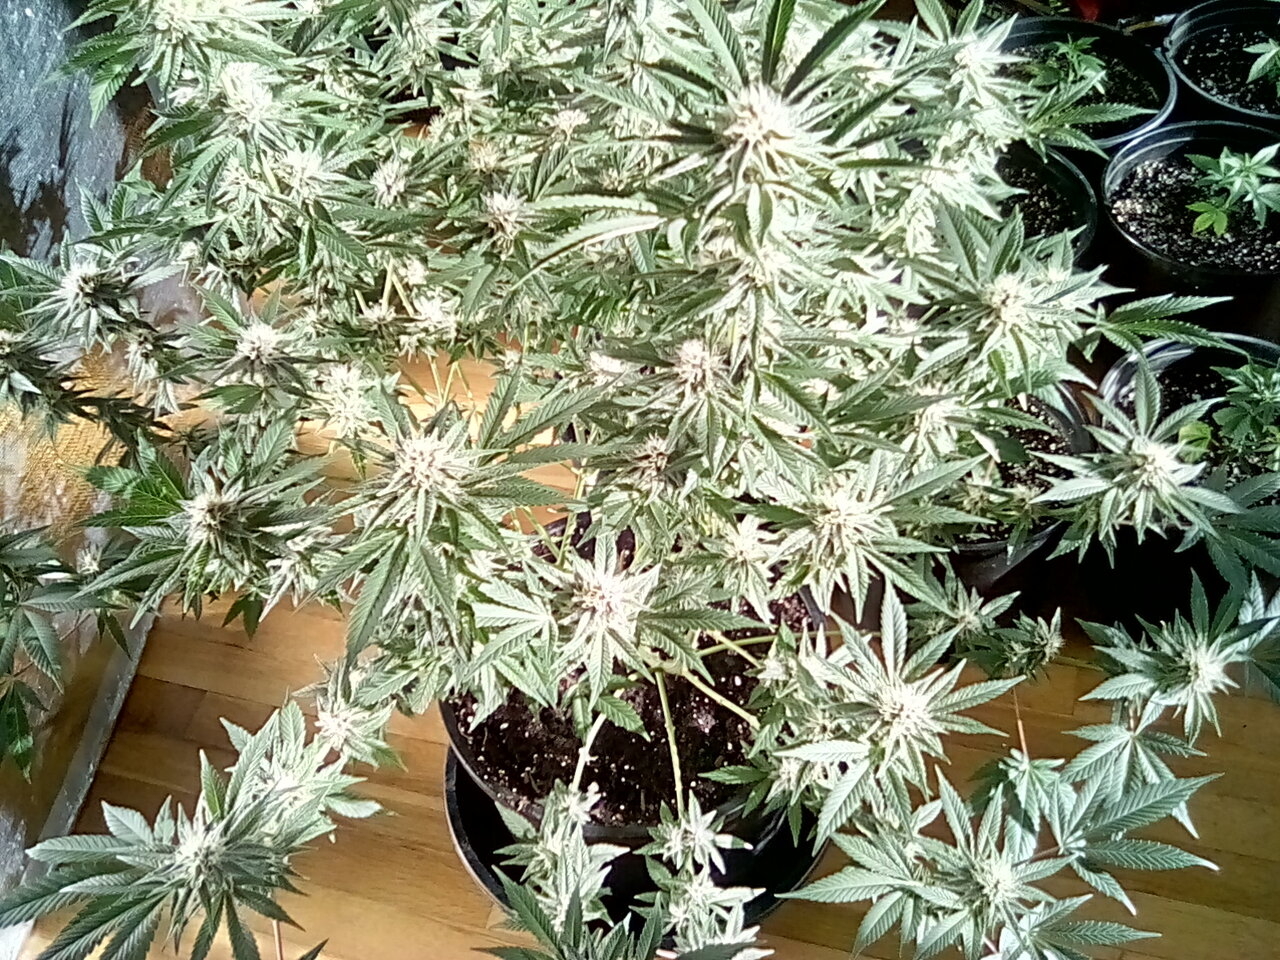 Day 40 Fruity pebbles purple pheno with intense sun and reflection buds now dripping with resin.